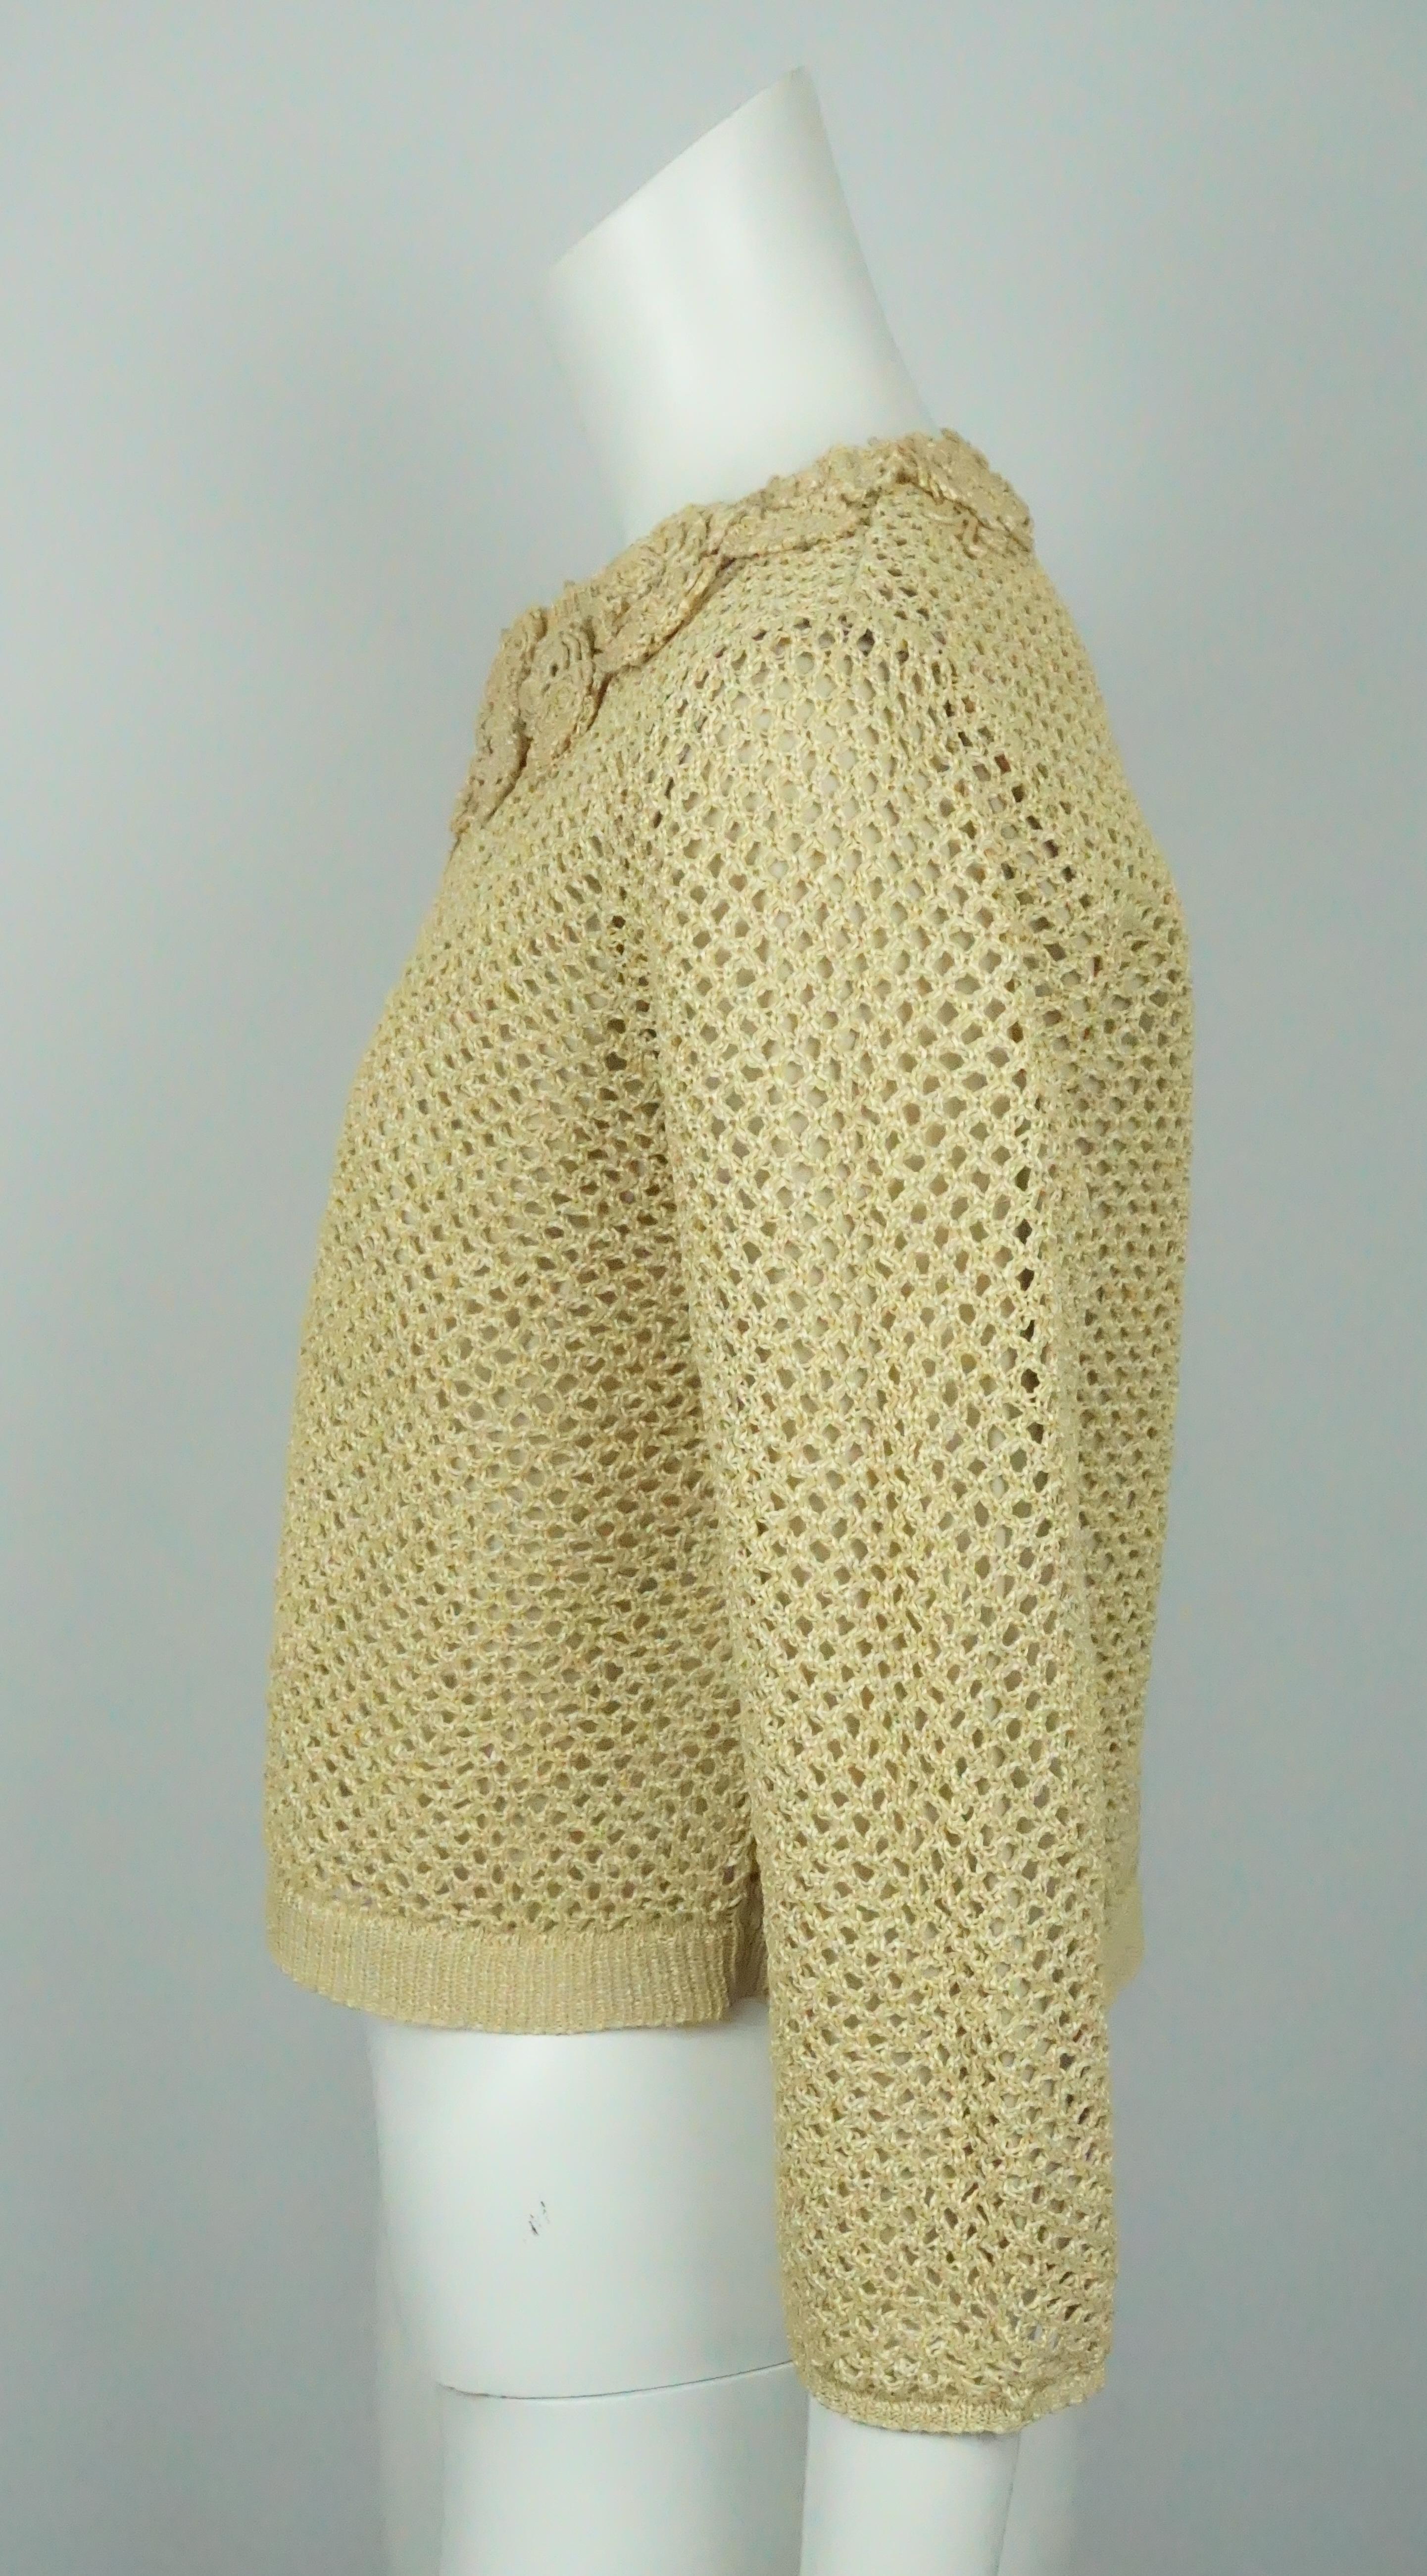 Red Valentino Beige Raffia Crochet Knit Jacket w/ Floral Detail -  Medium   This gorgeous jacket is in excellent condition. The jacket is made of modal and is lined in cotton. The exterior of the jacket has a crochet look to it and has a beautiful